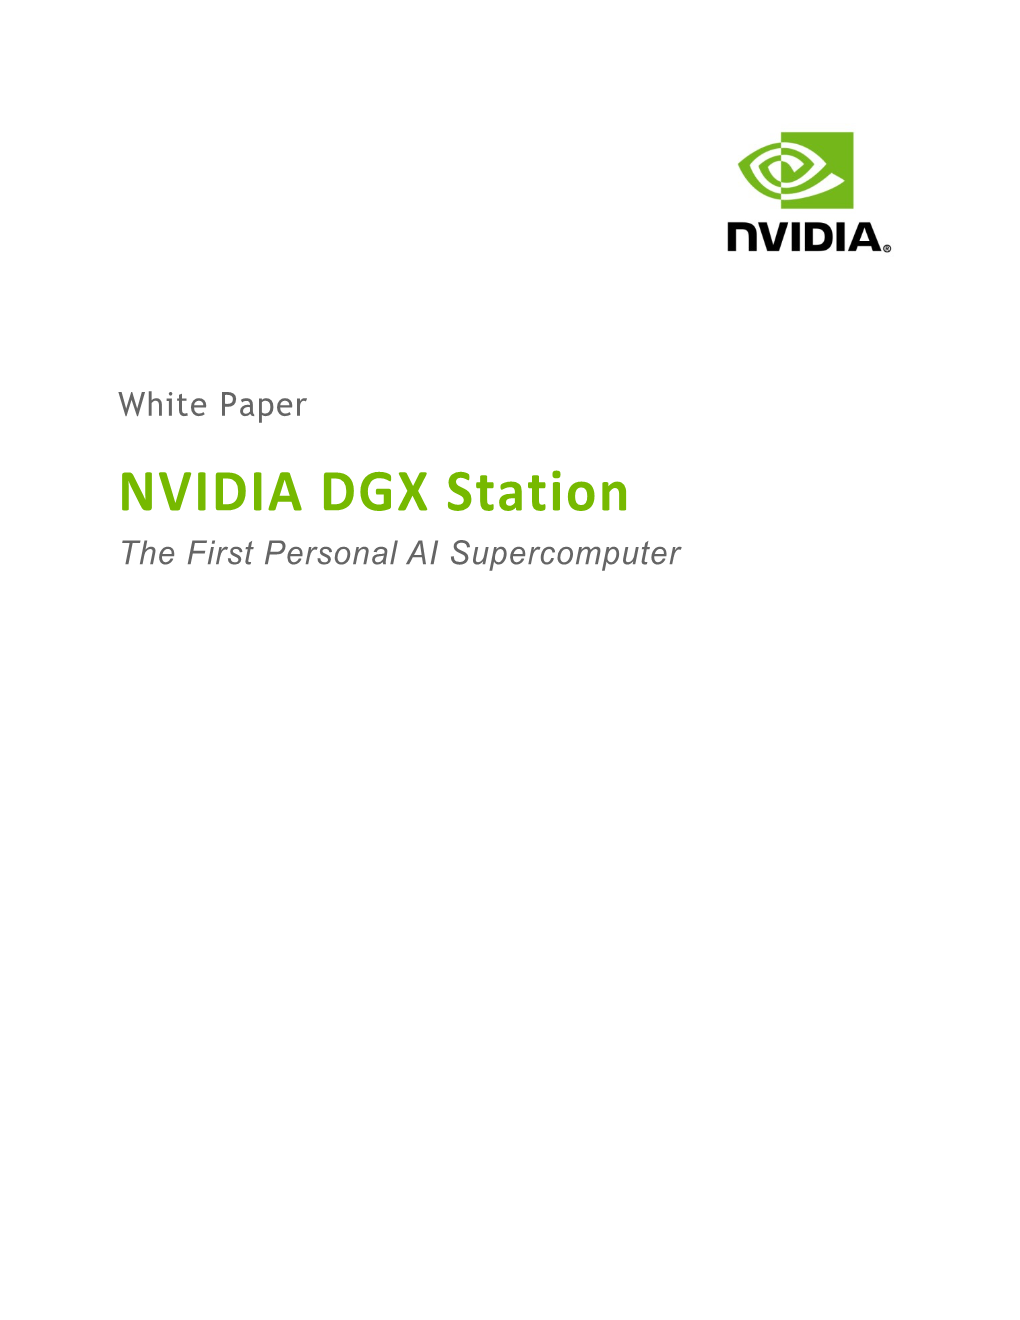 NVIDIA DGX Station the First Personal AI Supercomputer 1.0 Introduction